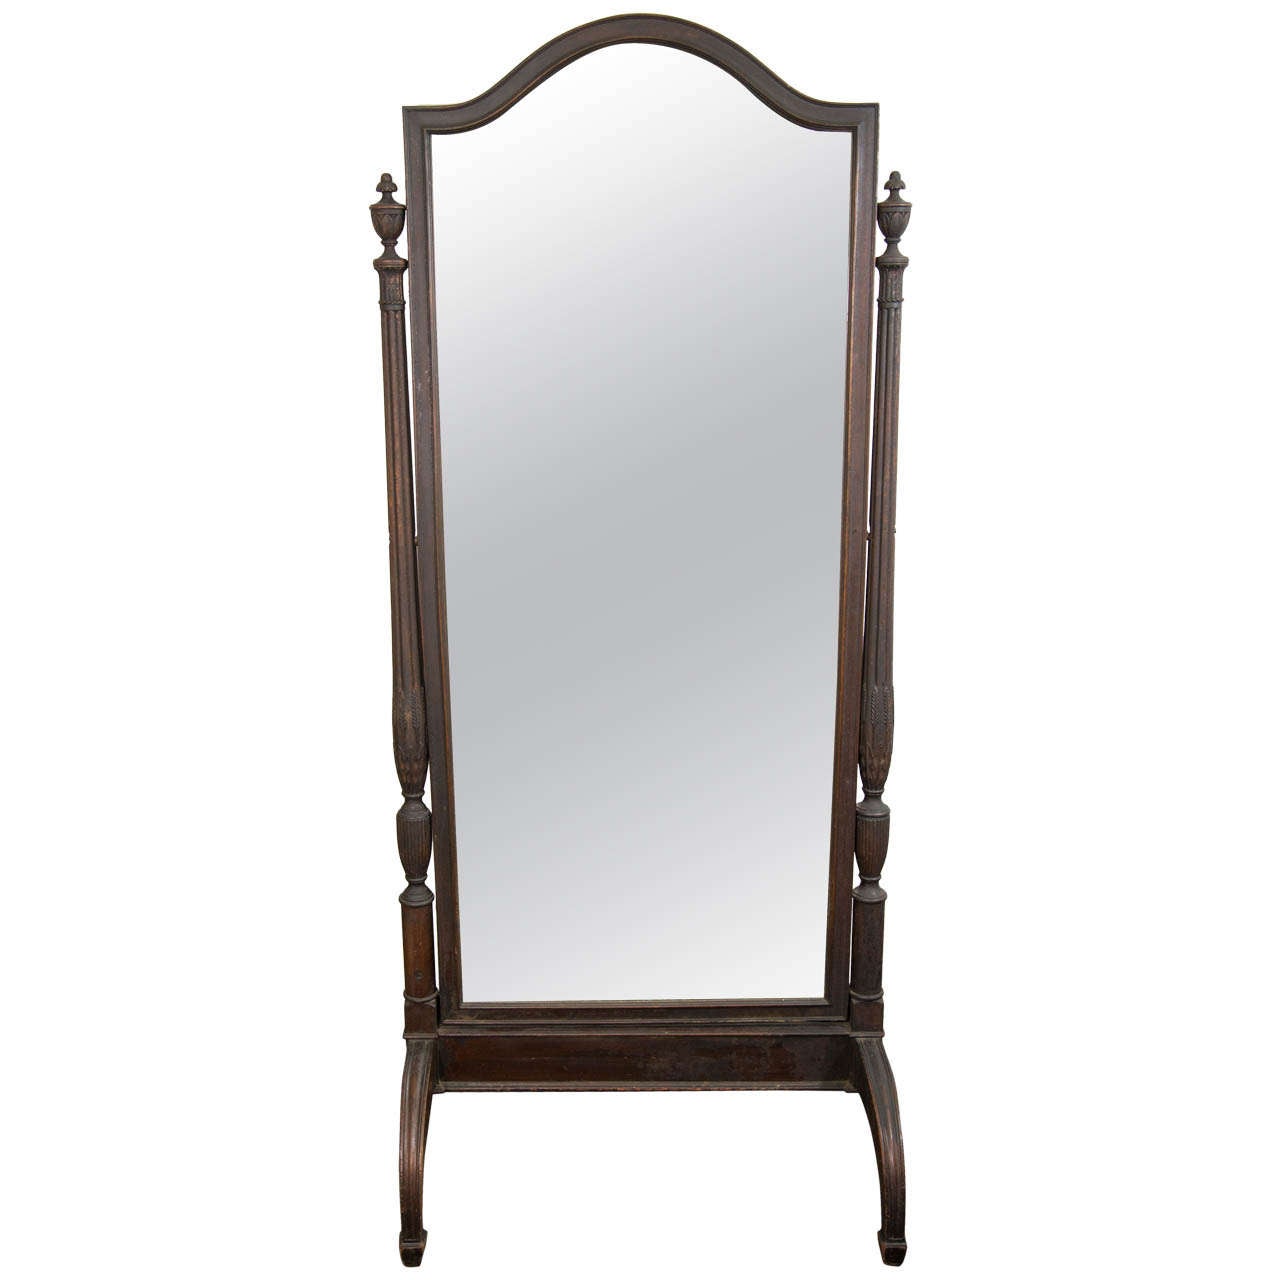 A 1920's Wooden Cheval Mirror